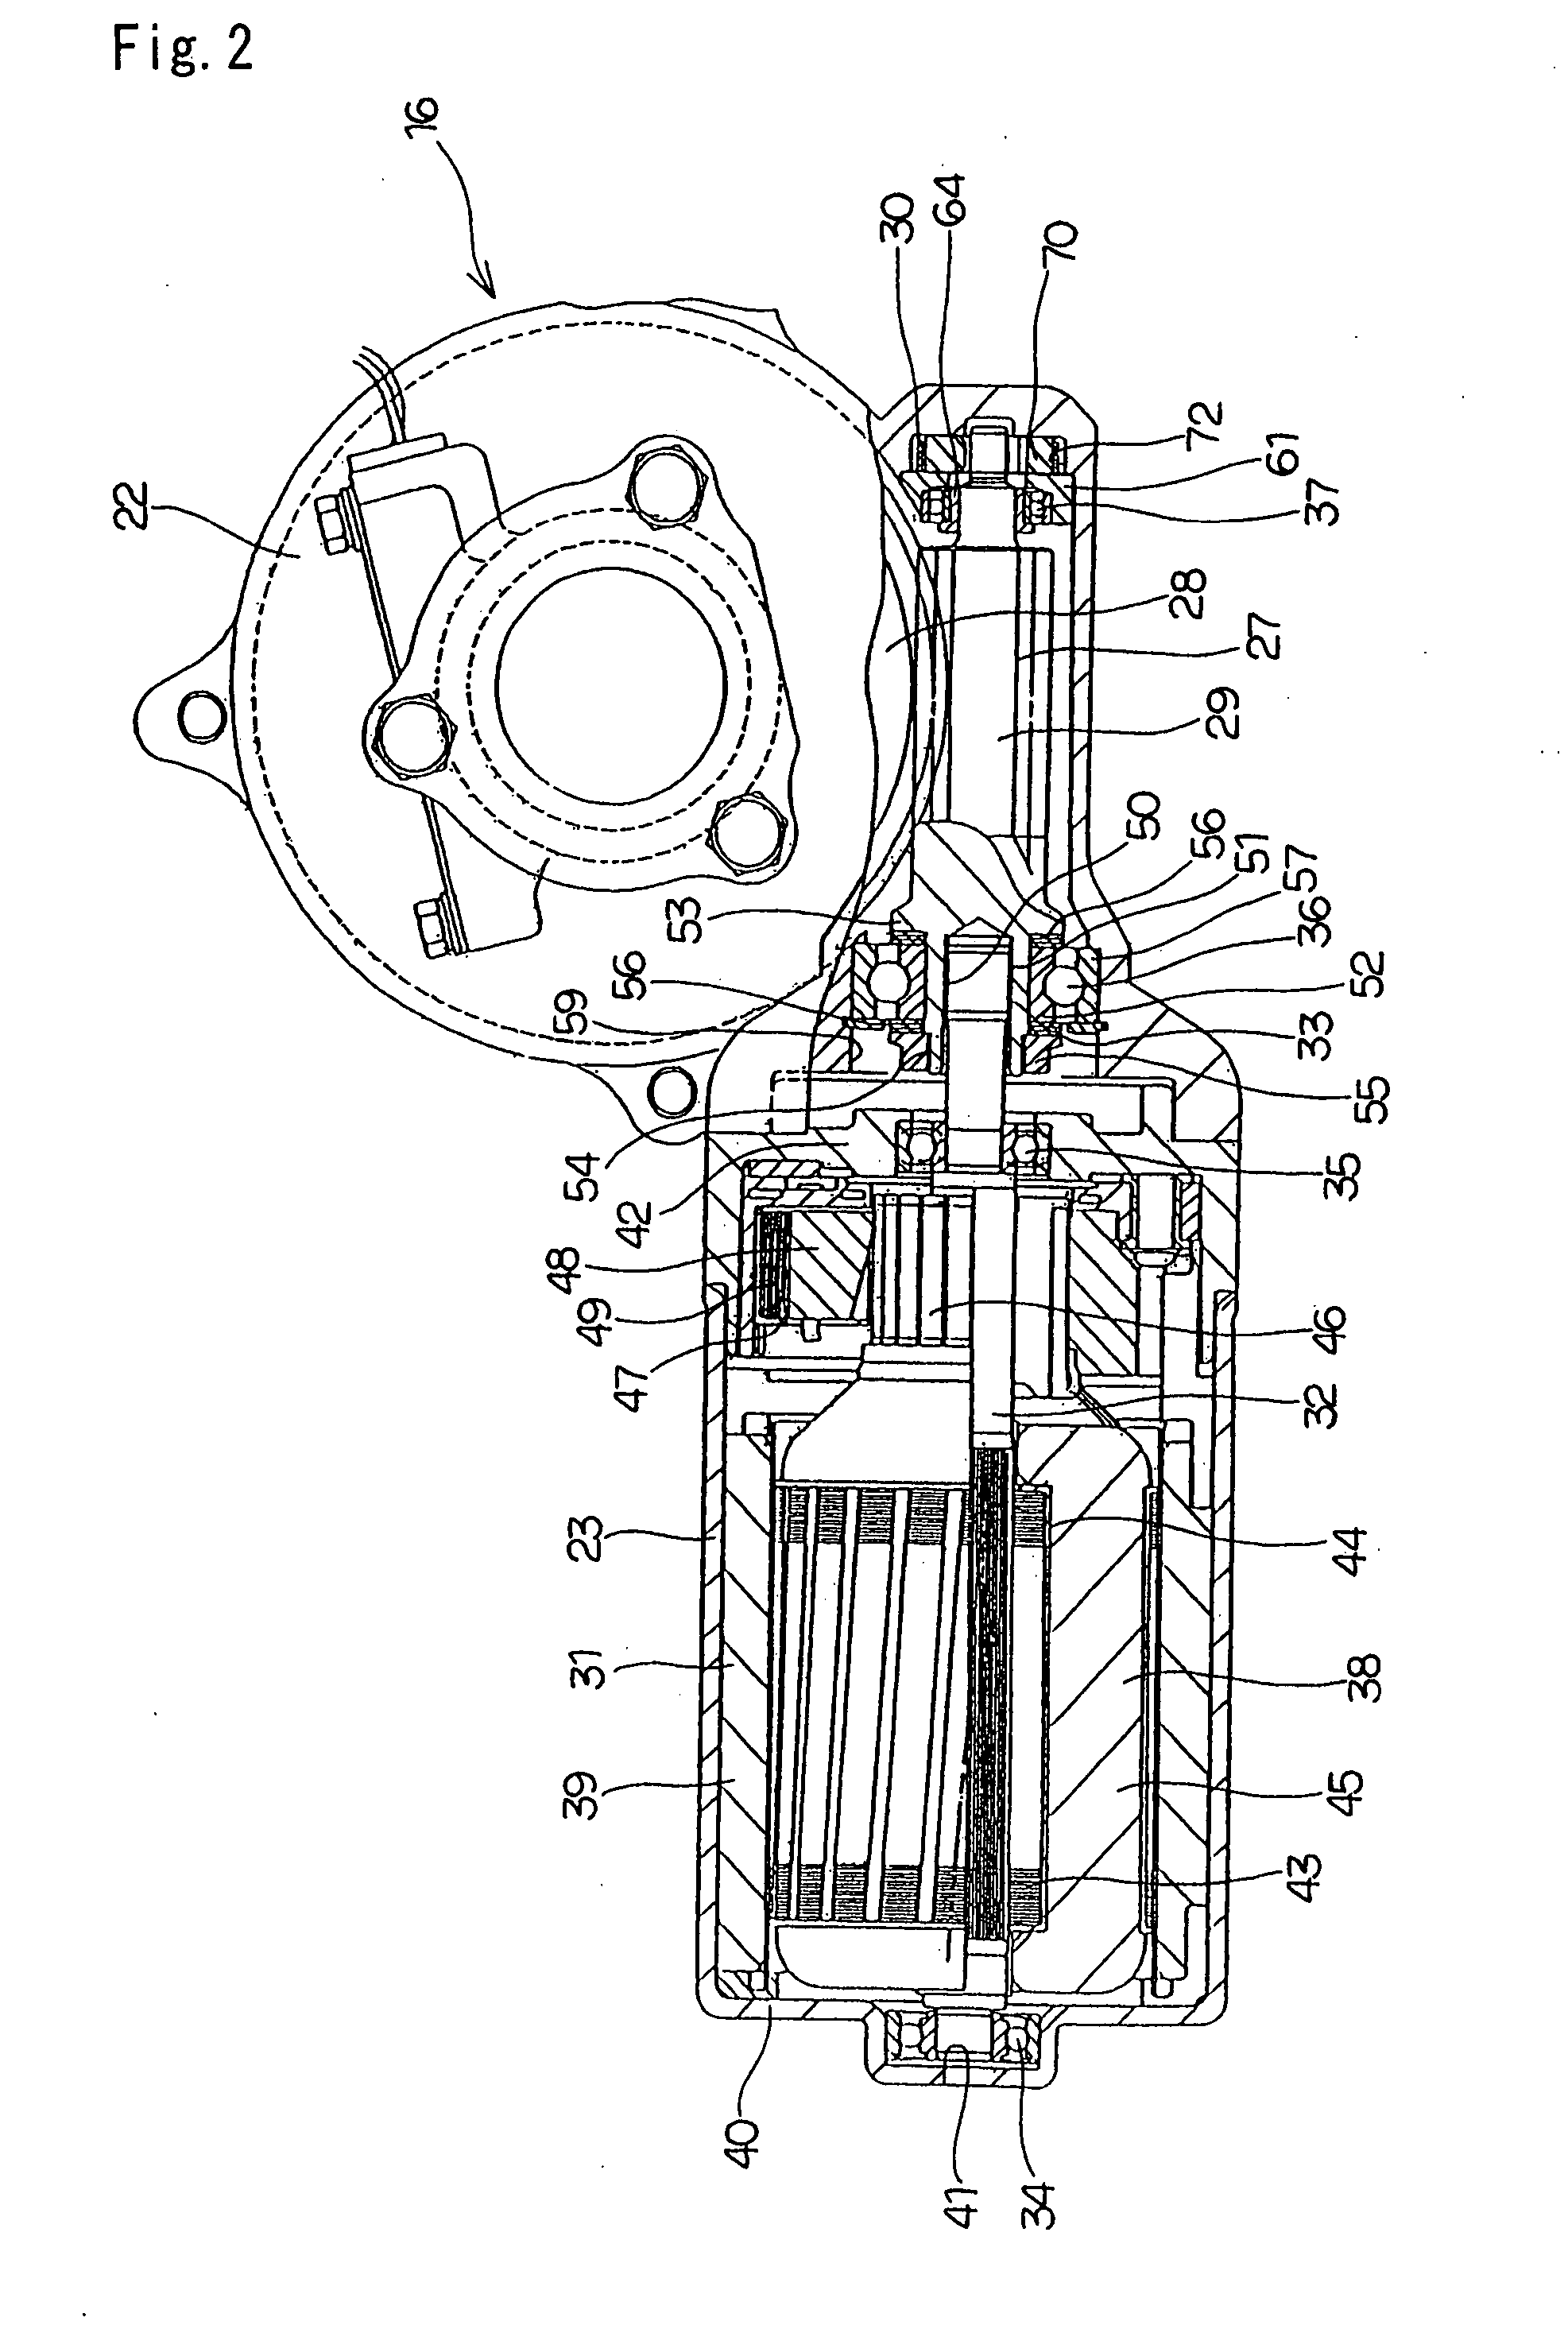 Worm reduction gear and electric power steering apparatus